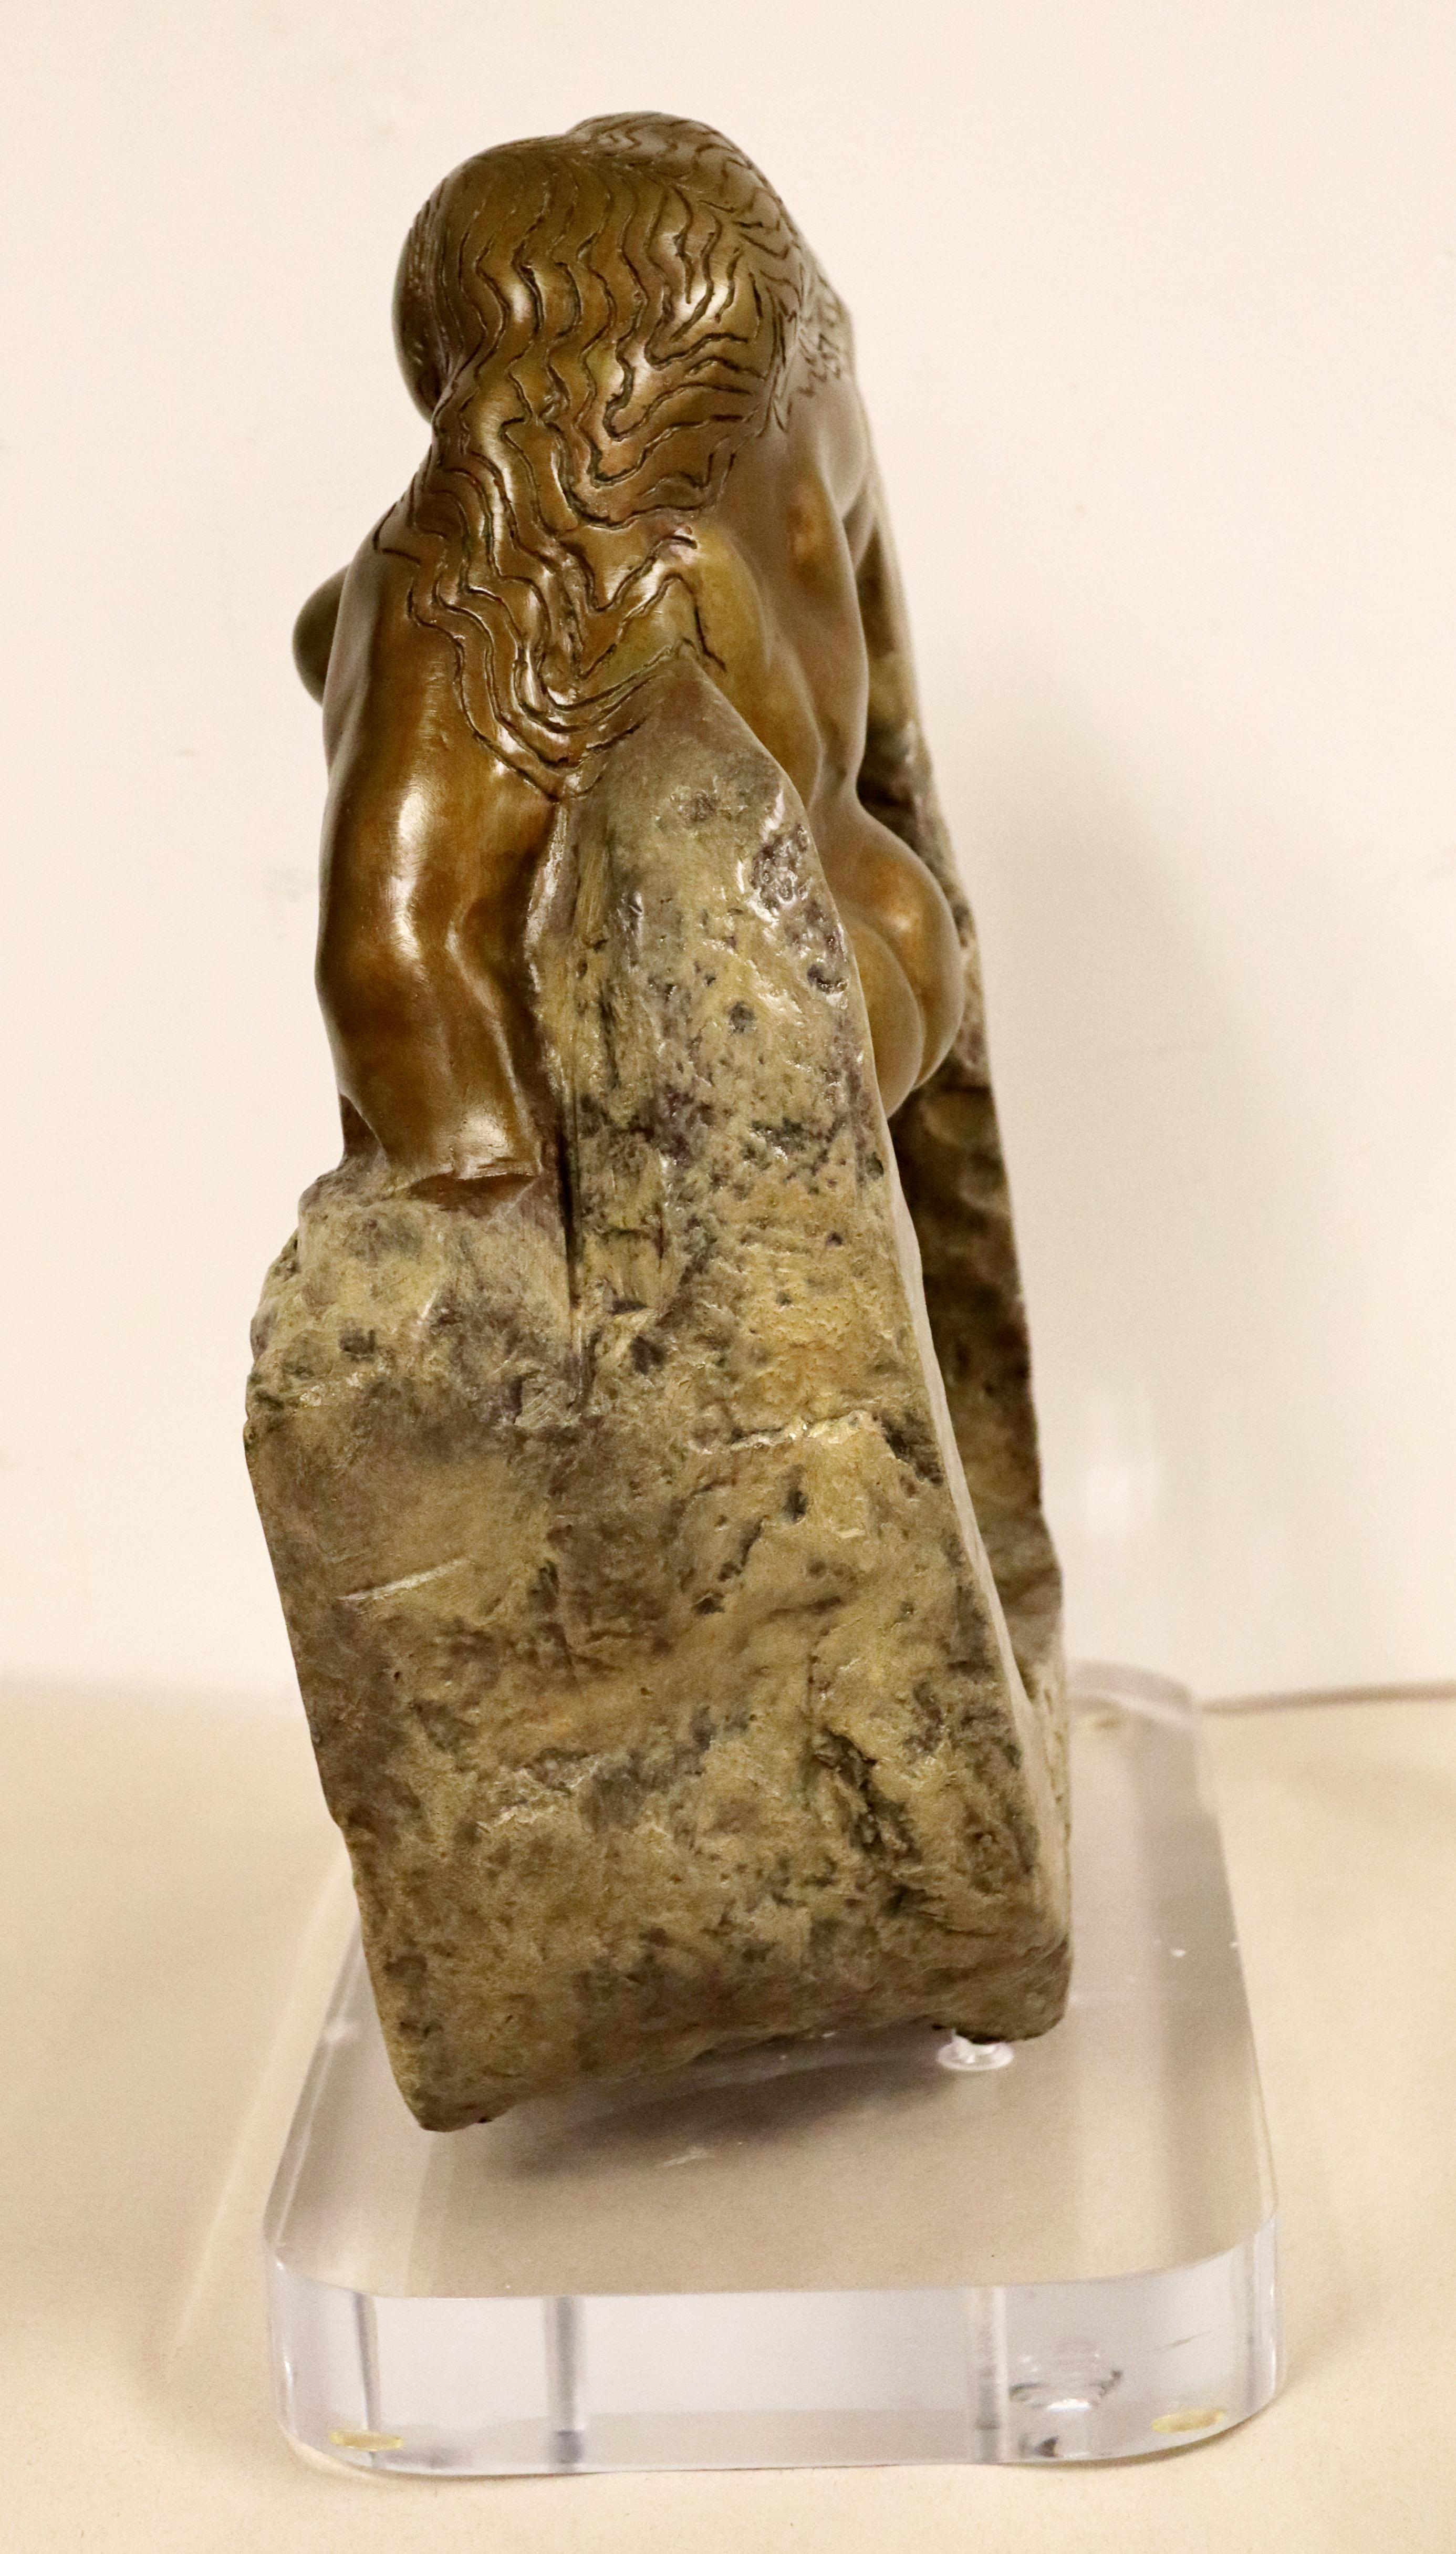 Contemporary Bronze Table Sculpture Duchess Nude Signed by Jerry Soble, 1990s For Sale 3